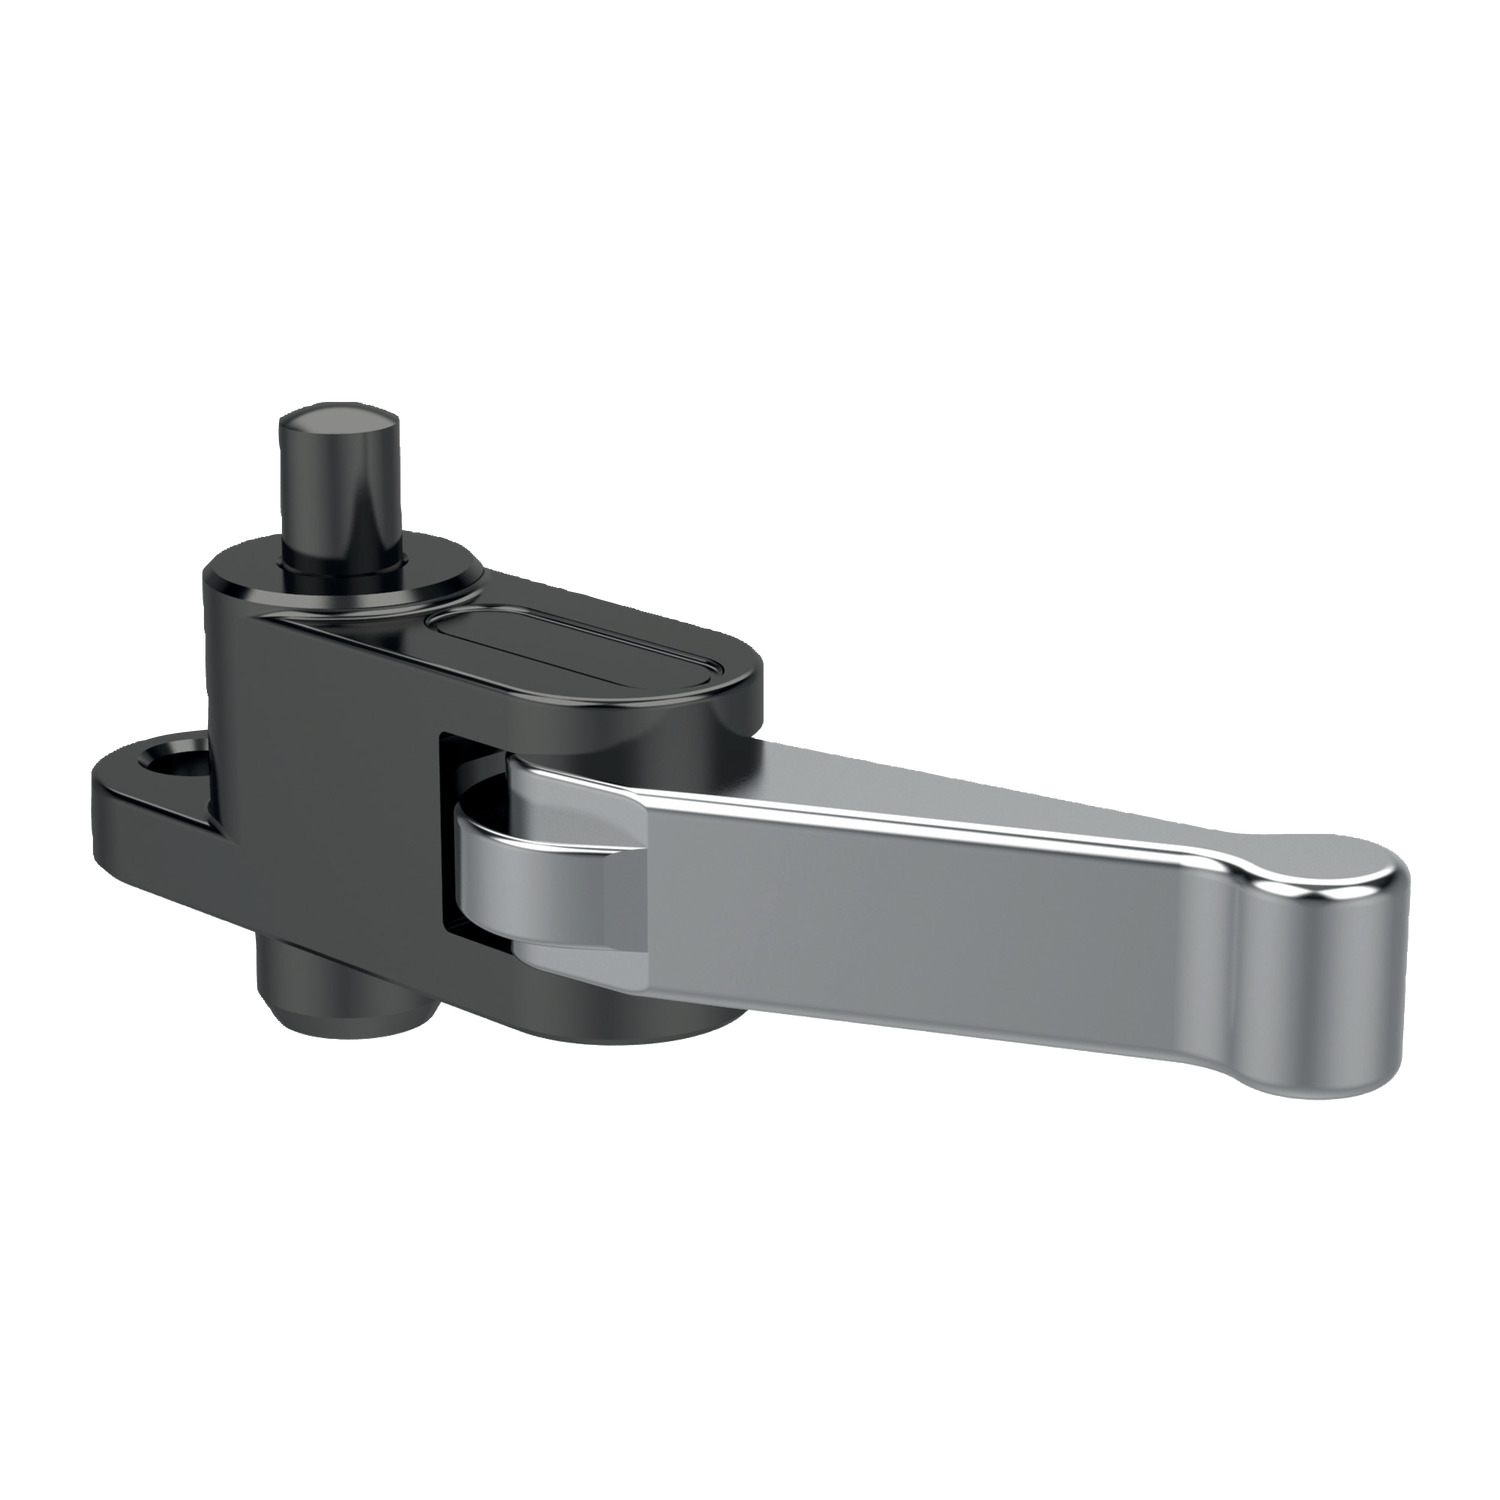 Product 17002, Compact Work Supports with cam handle / 